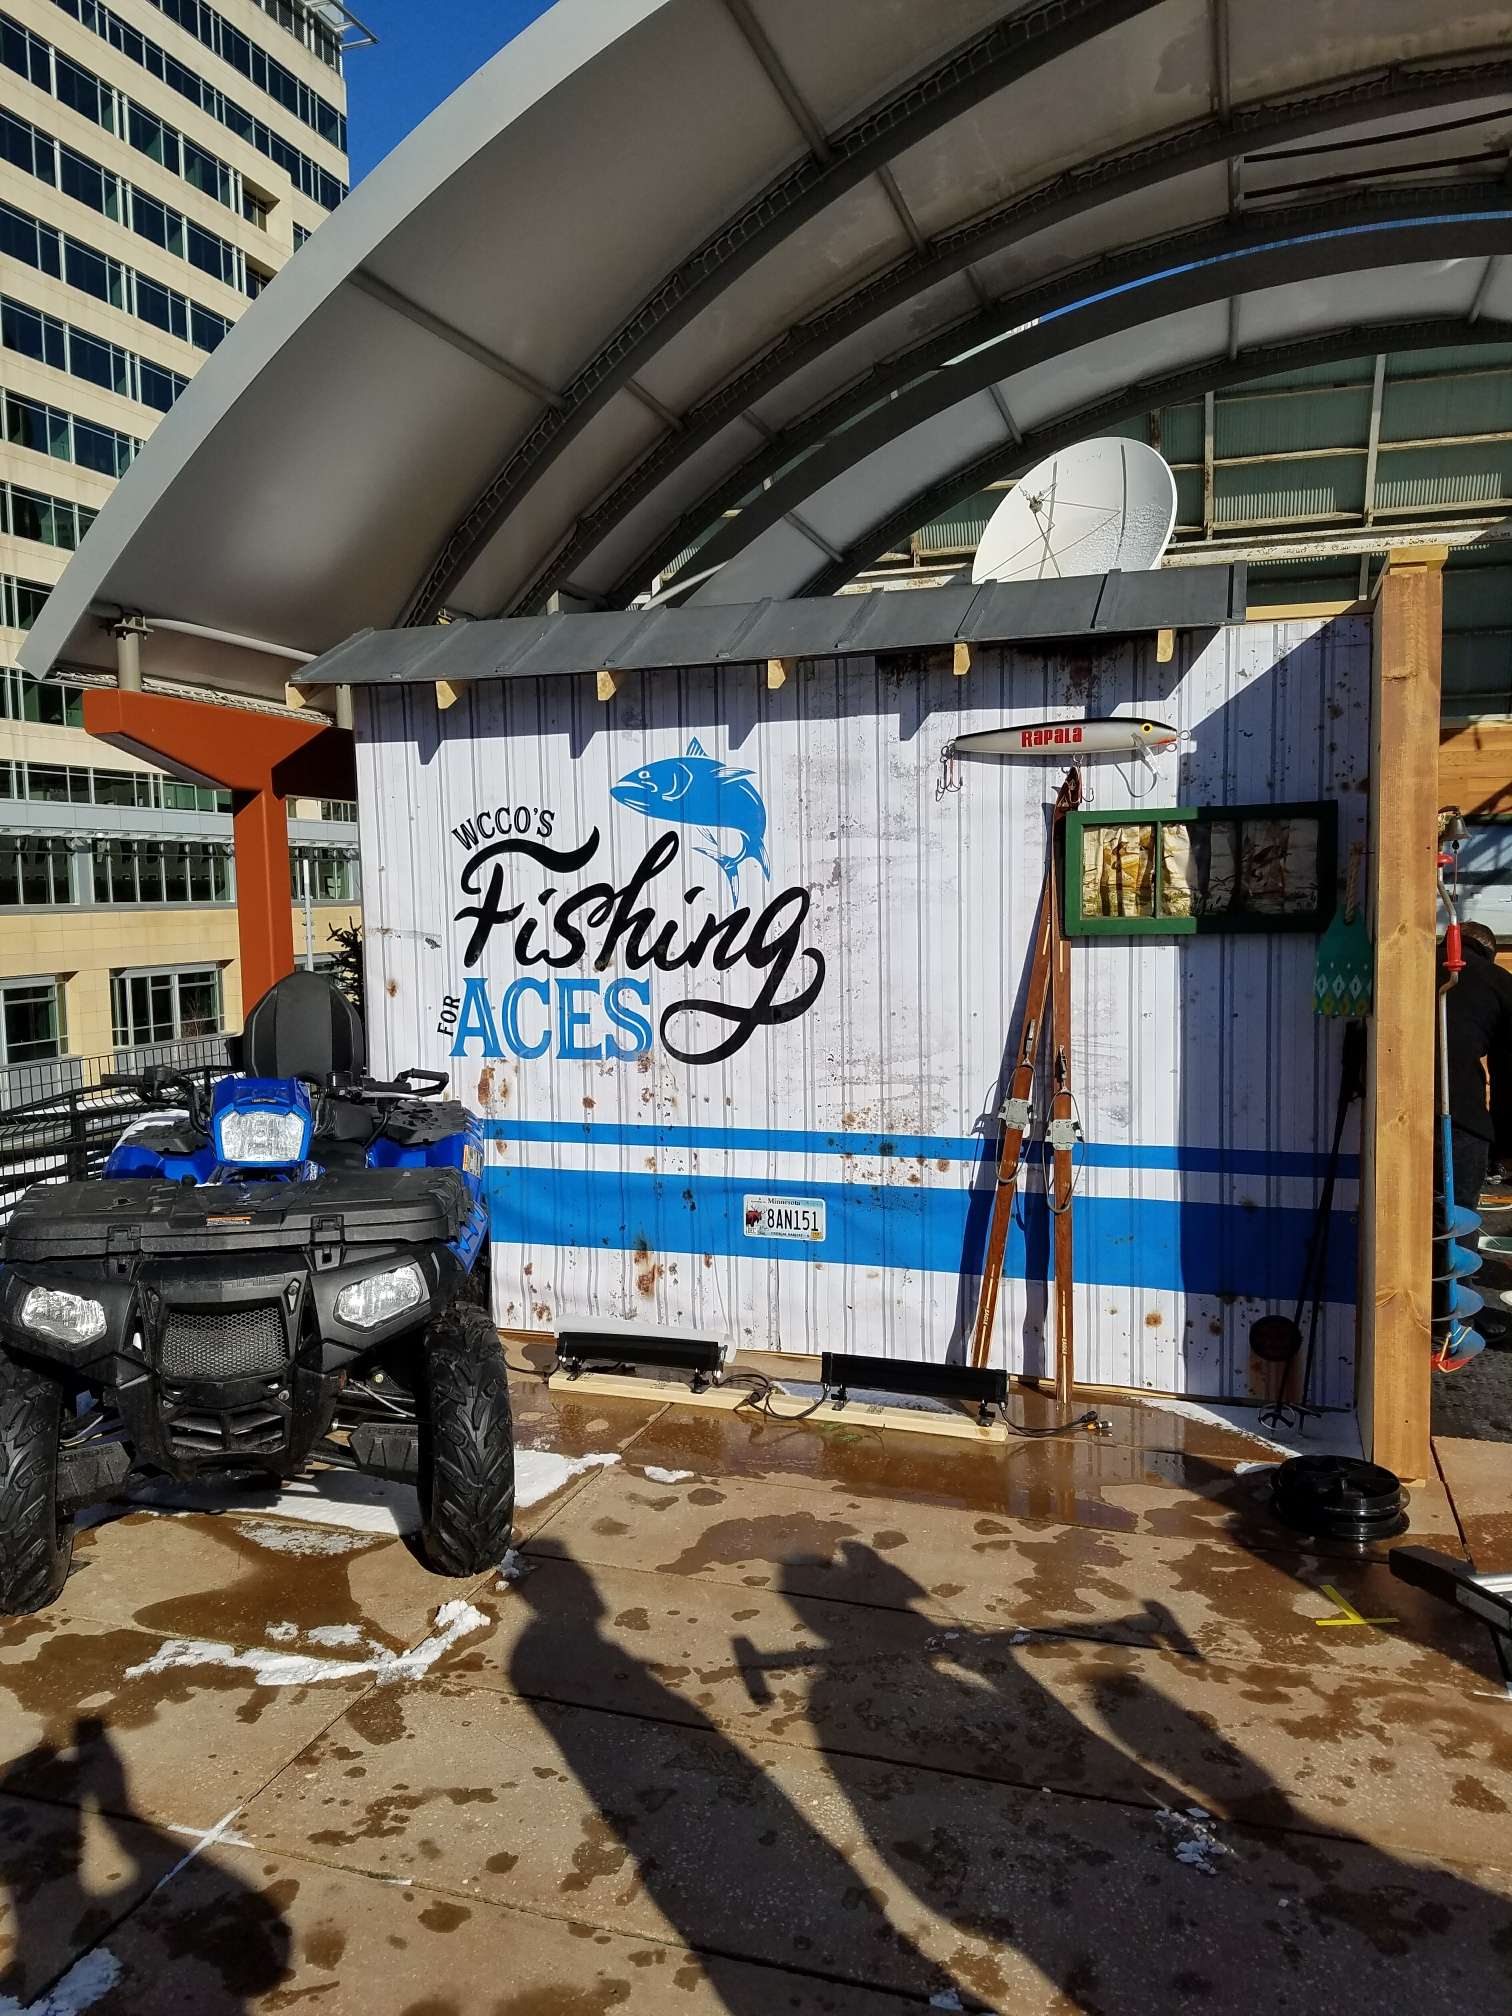 If you happen to be in Minneapolis and want to go ice fishing on a rooftop, this is your chance. Enjoy this behind-the-scenes look at the event. 